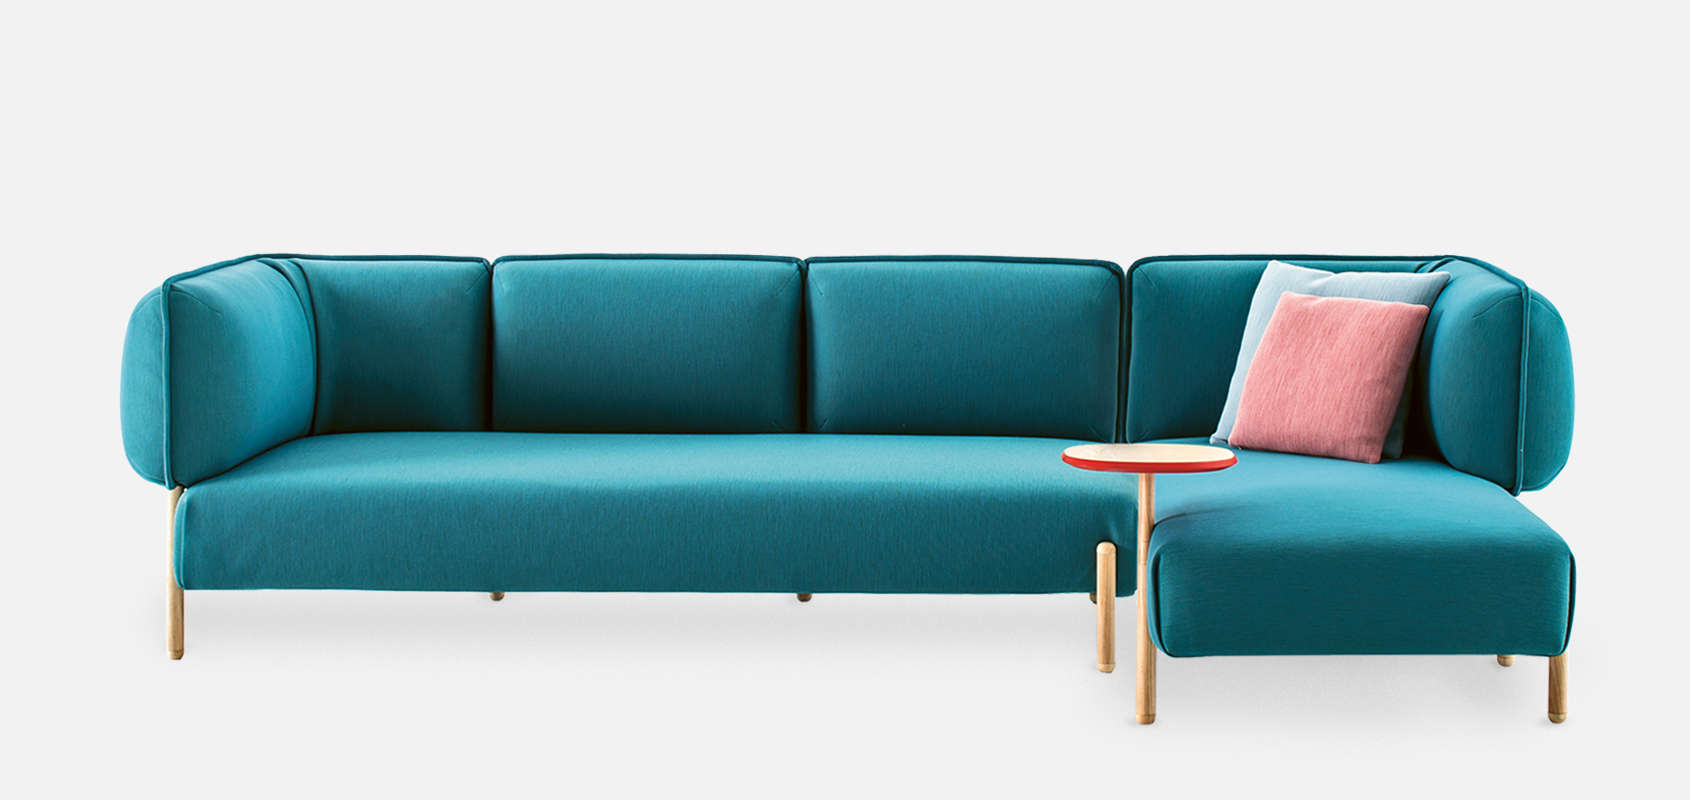 Tender Sofa With Chaise